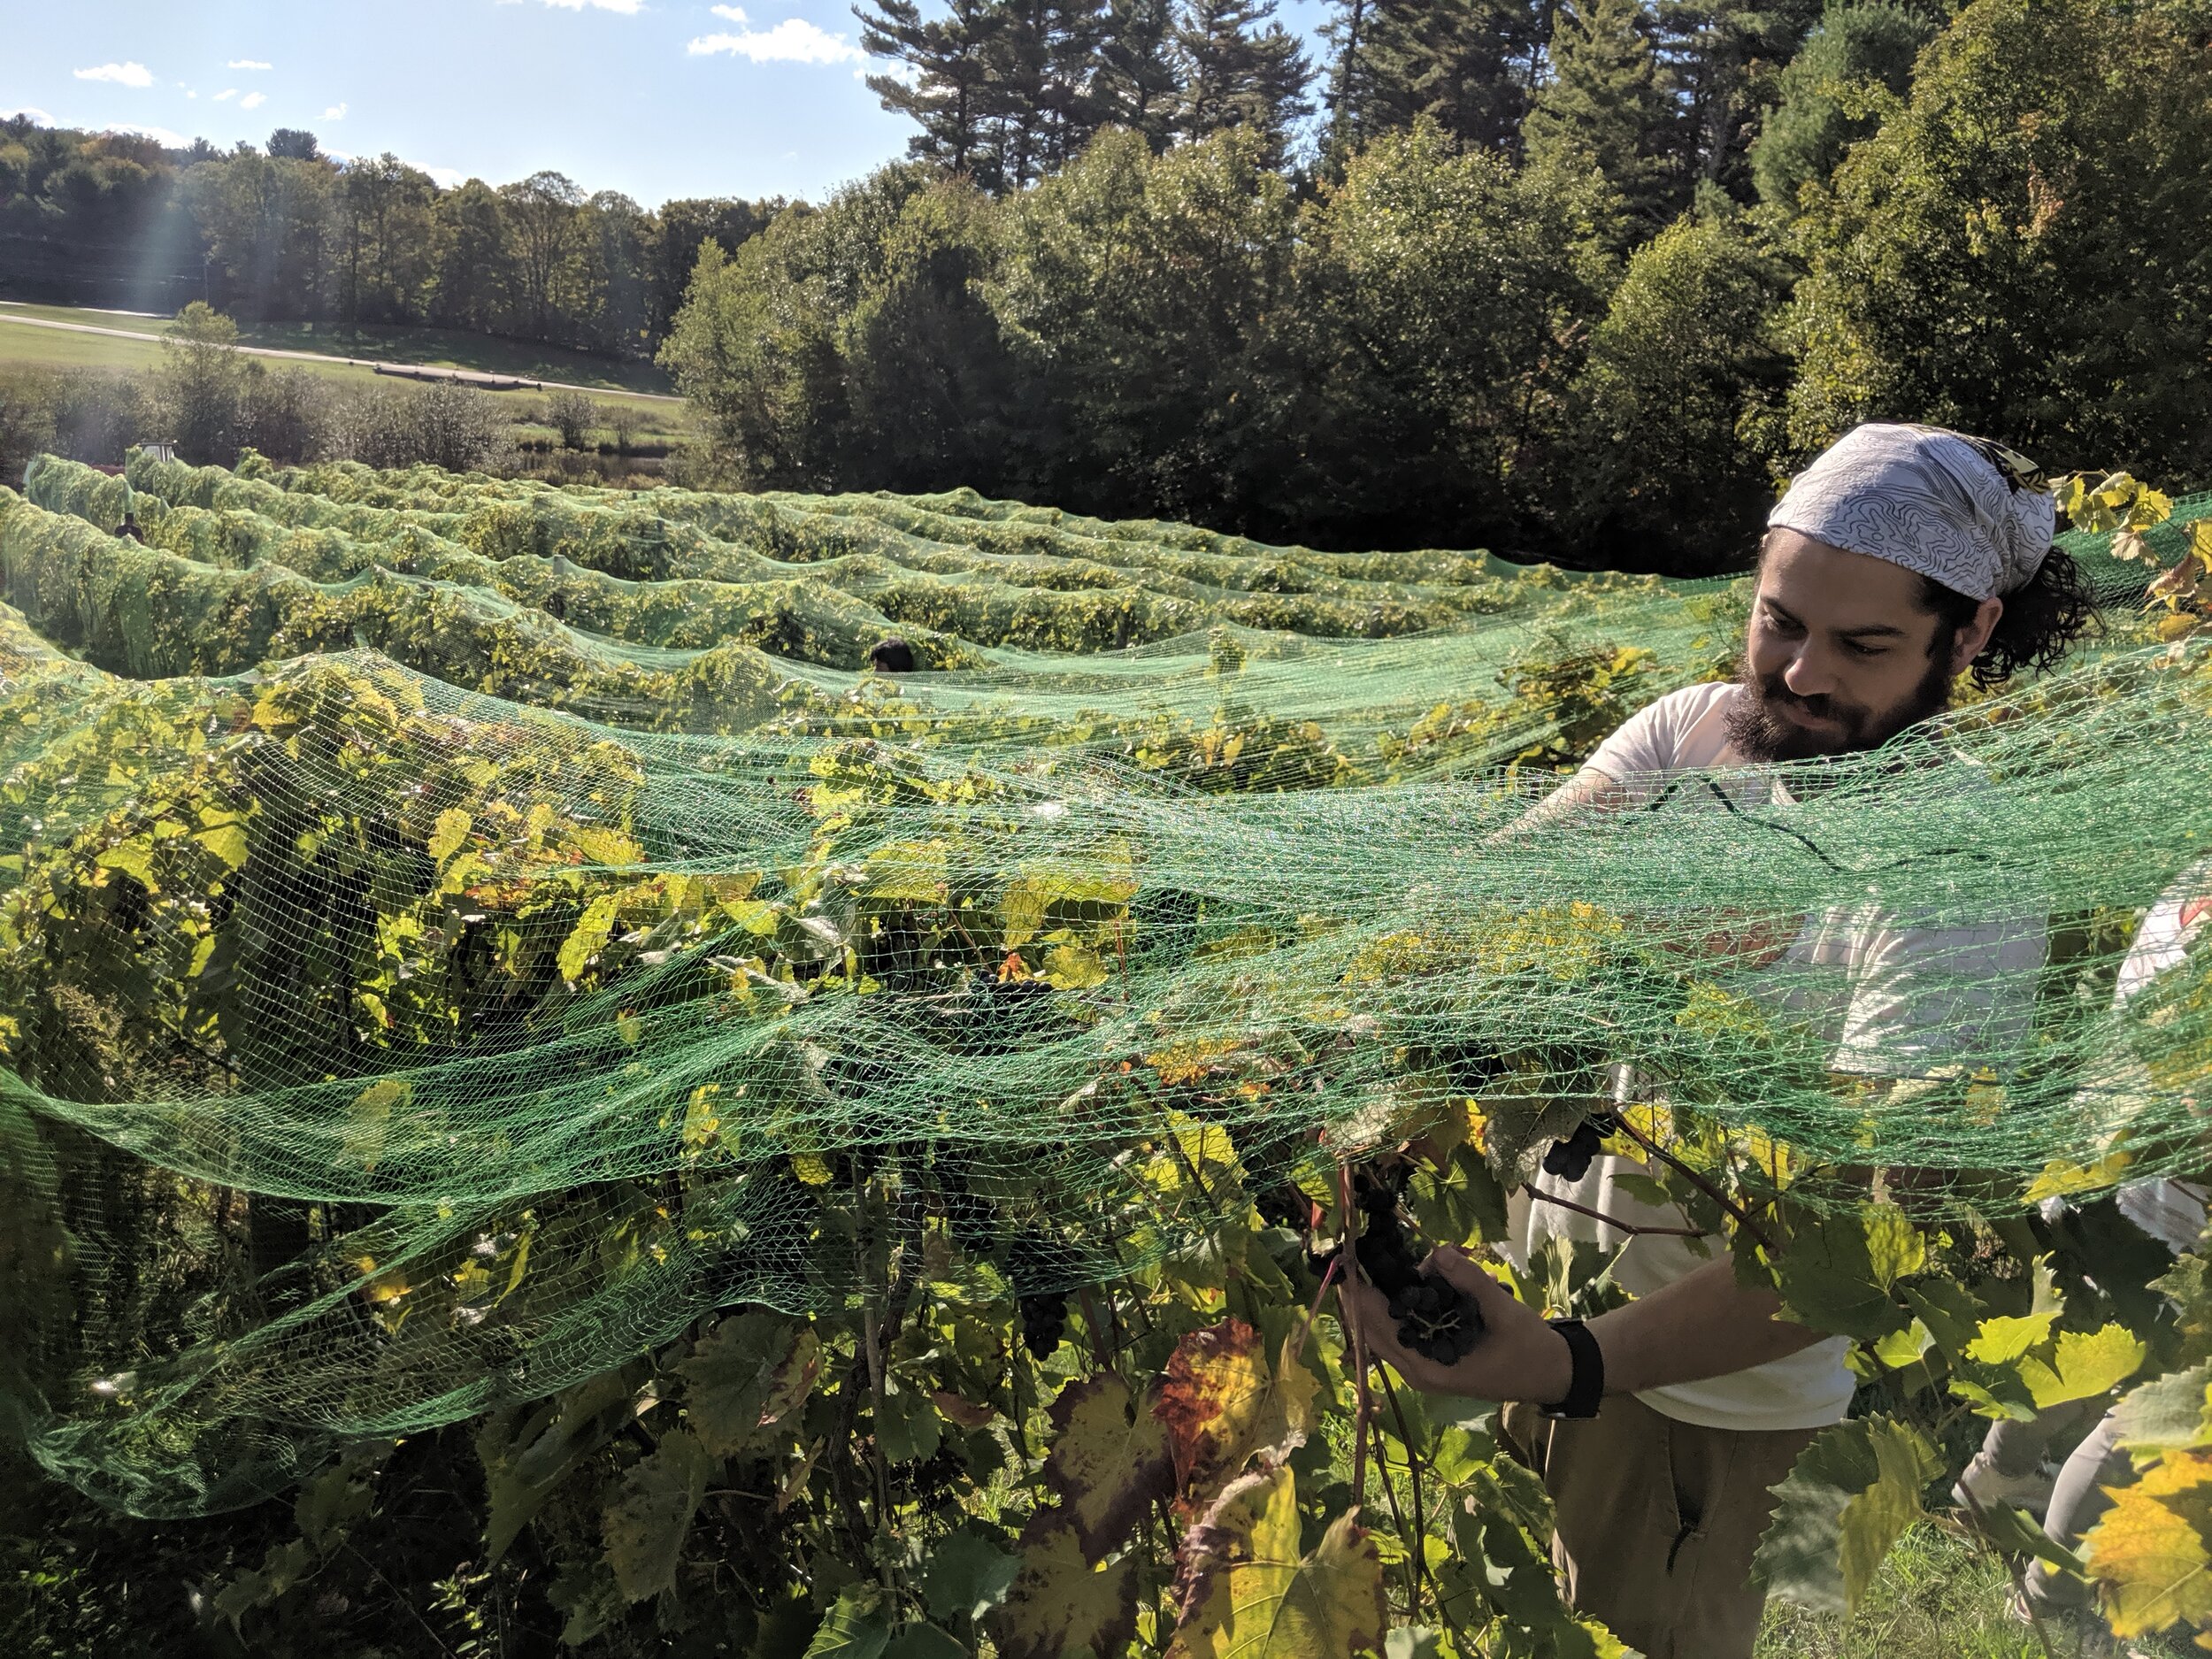  Harvesting grapes at Agronomy Vineyard in MA 